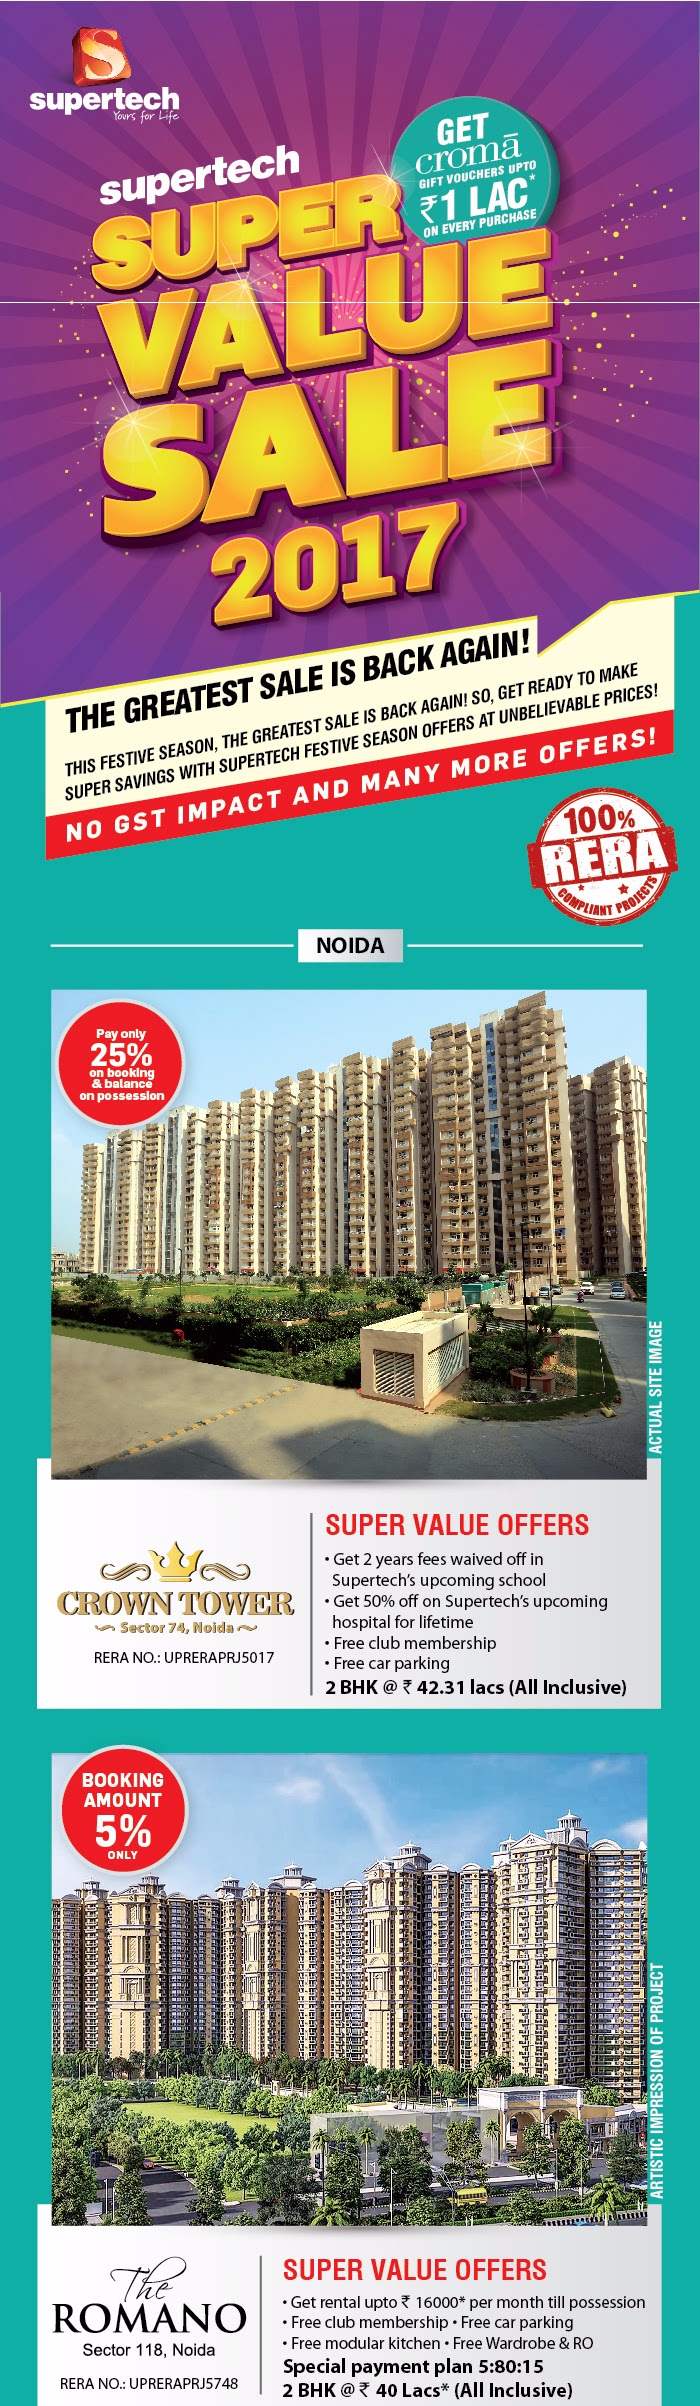 Get gift Vouchers up to Rs.1 Lac on every Booking during Super Value Sale Offer on Supertech Projects Update